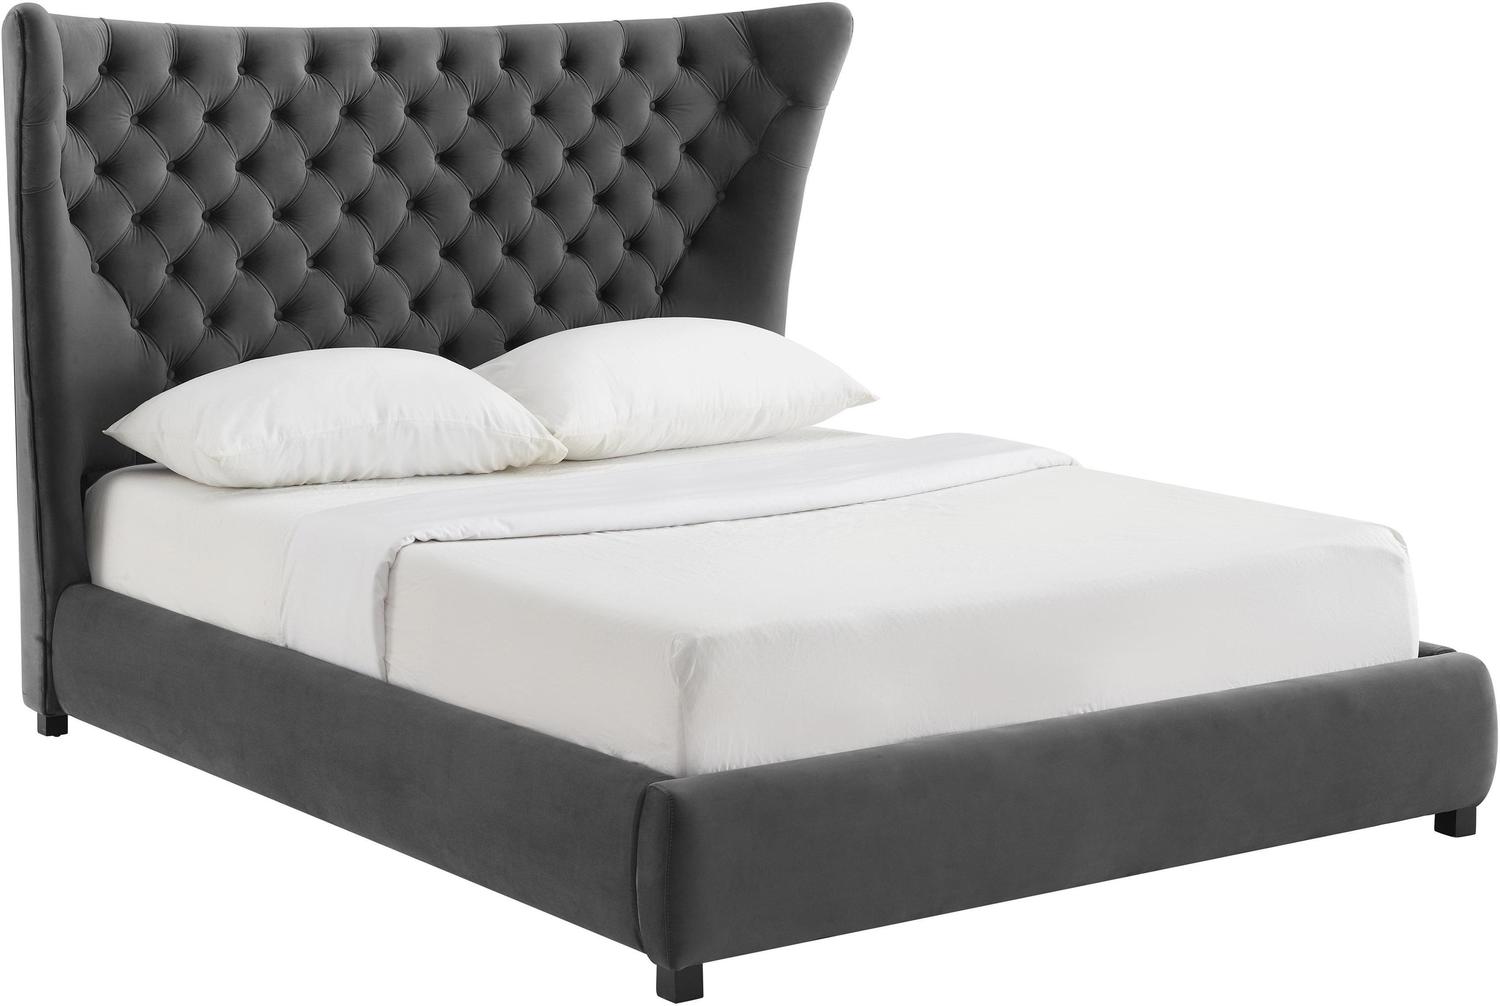 high profile queen bed frame with headboard Tov Furniture Beds Grey